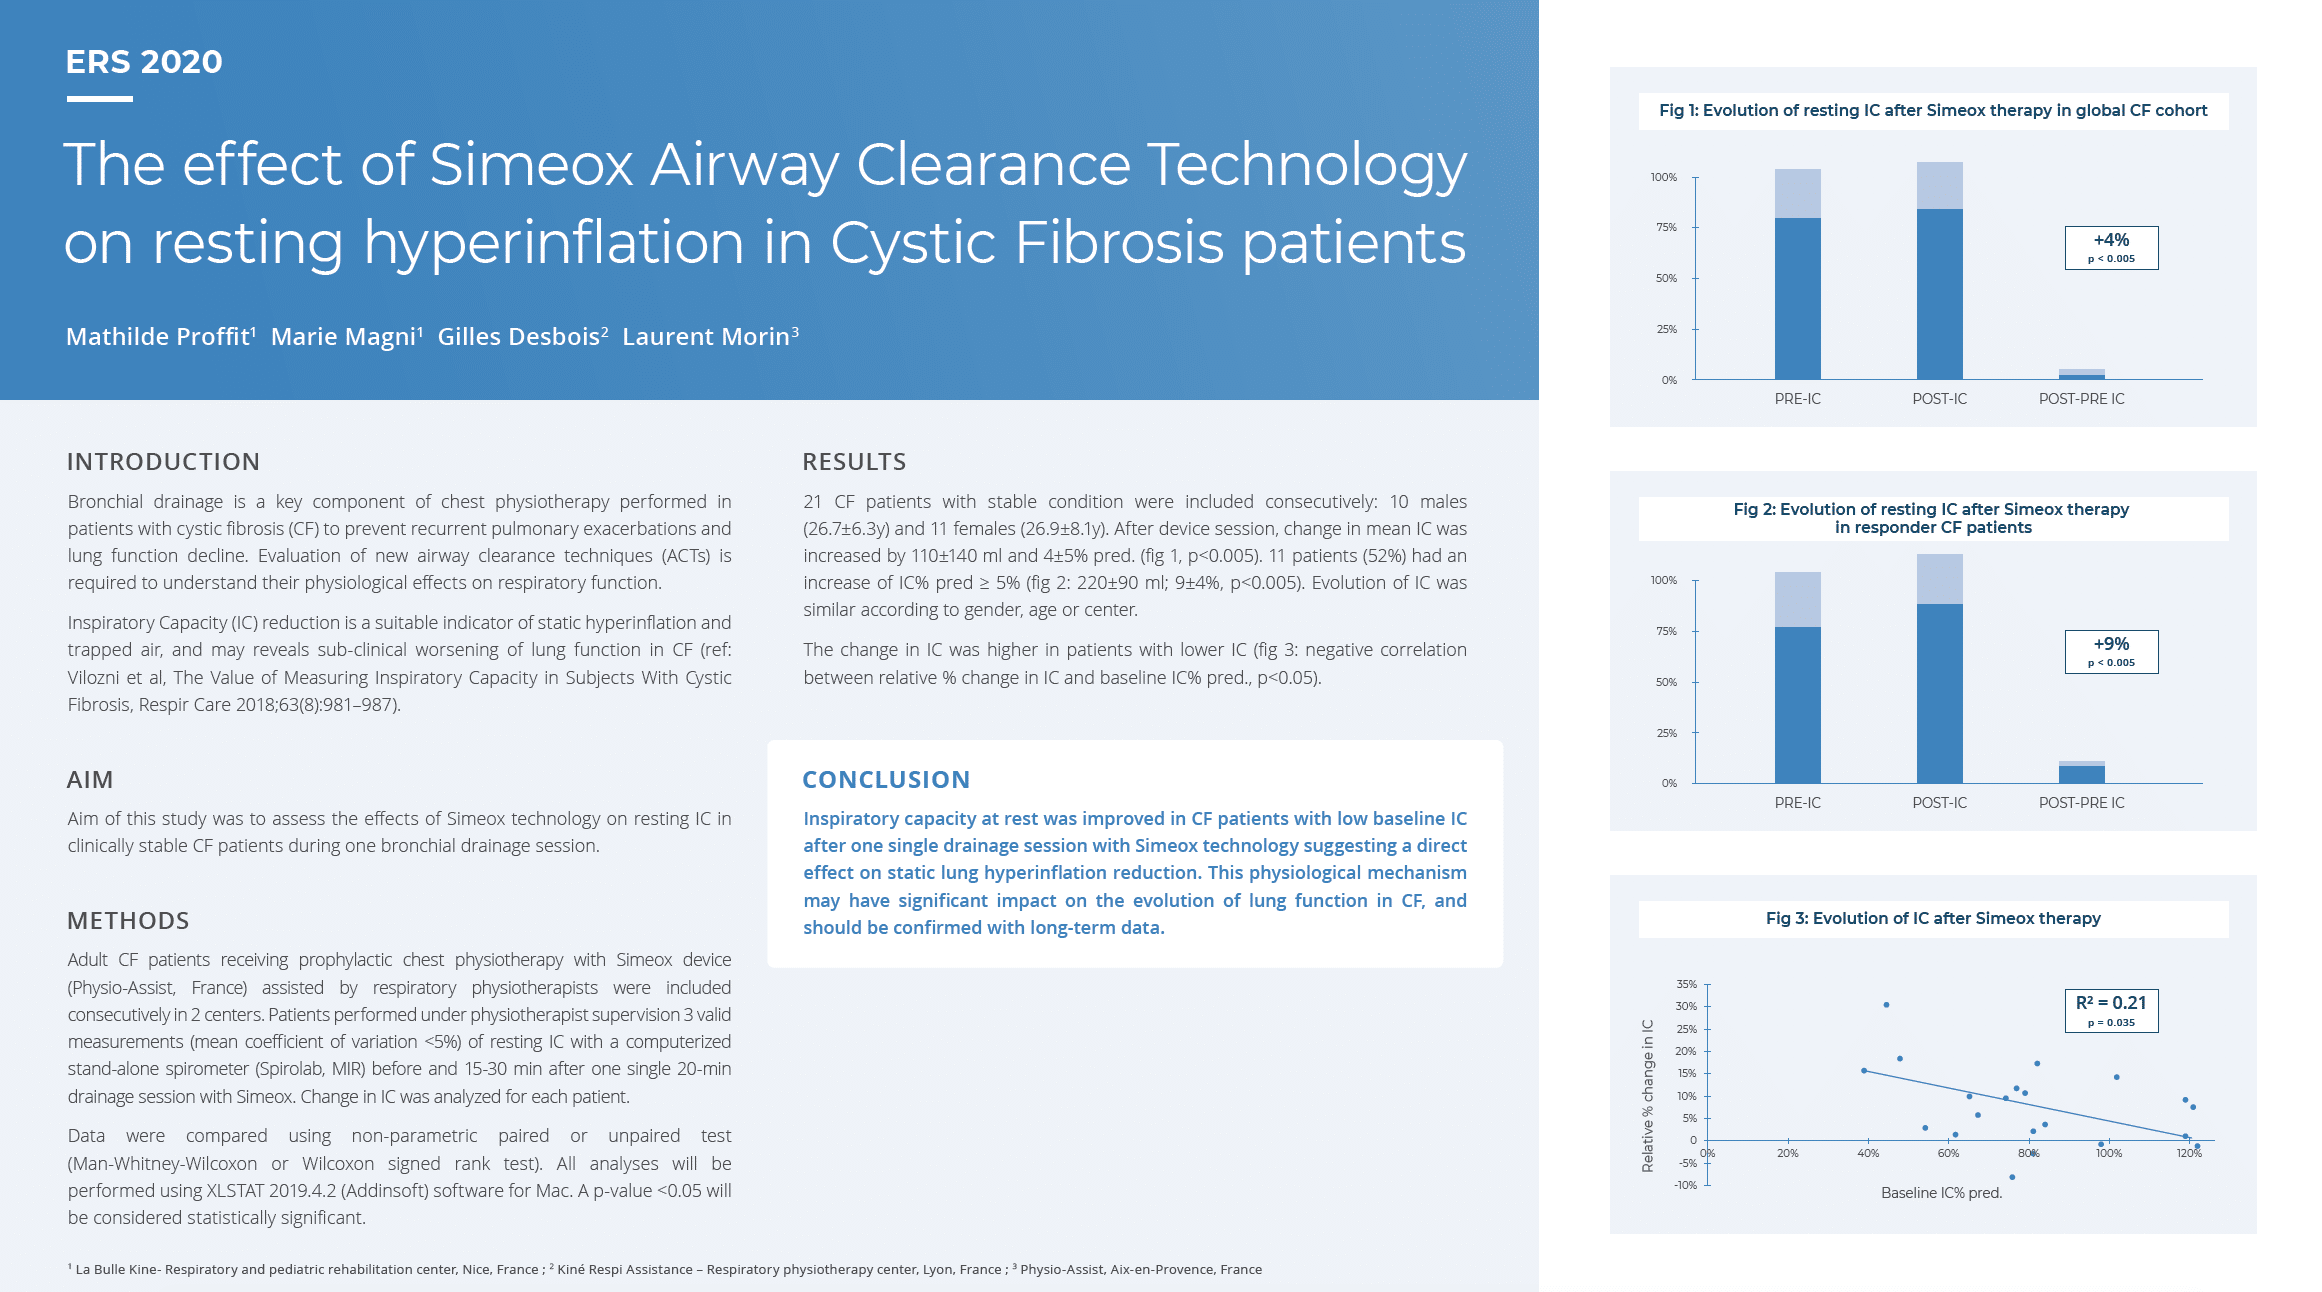 The effect of Simeox Airway Clearance Technology on resting hyperinflation in Cystic Fibrosis patients